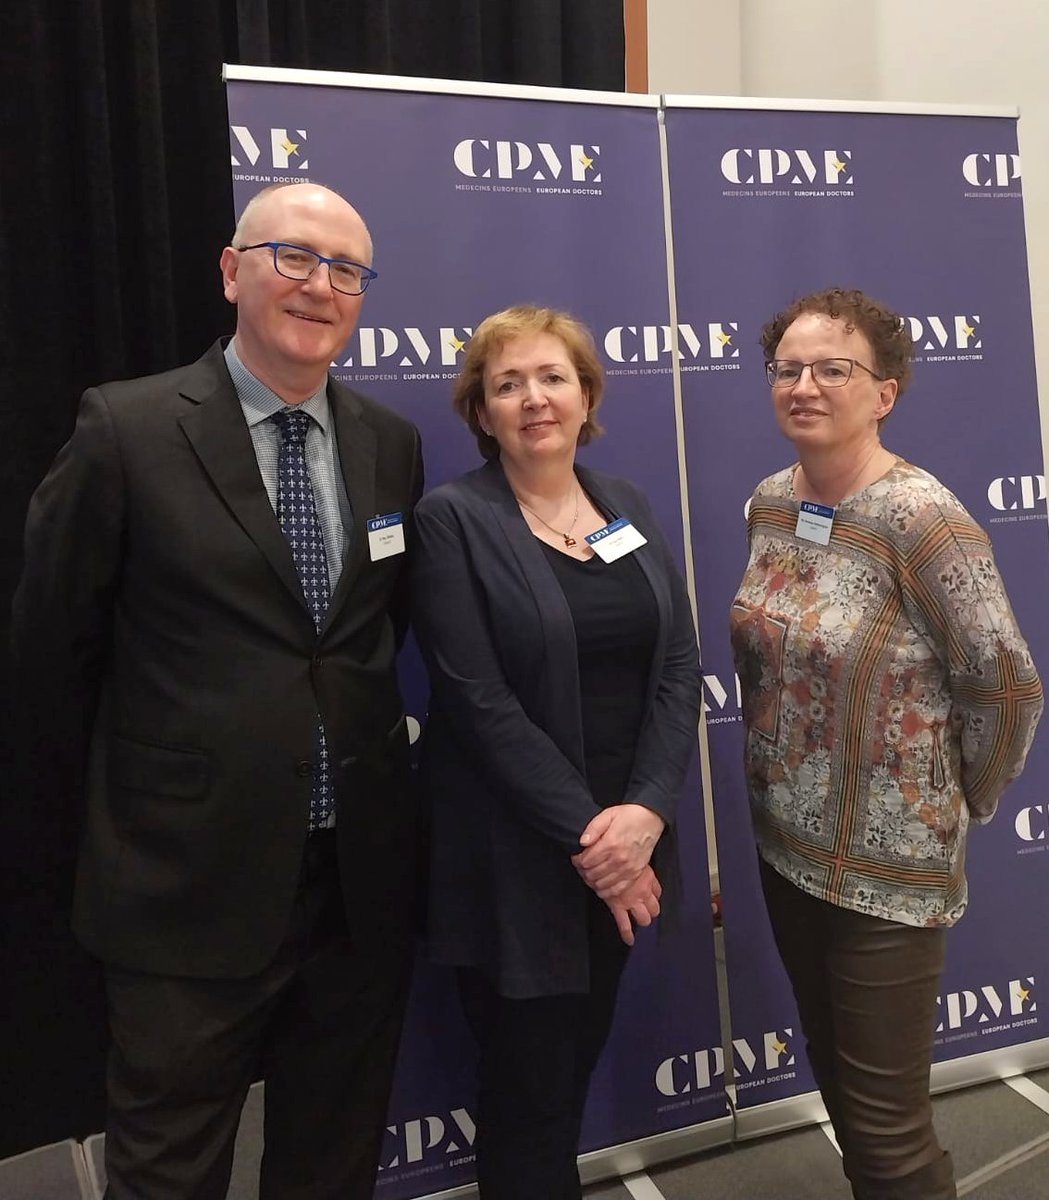 IMO delegation @WalleyRay Dr Ina Kelly and Ms Vanessa Hetherington at #CPME_GE in Ljubljana @CPME_EUROPA